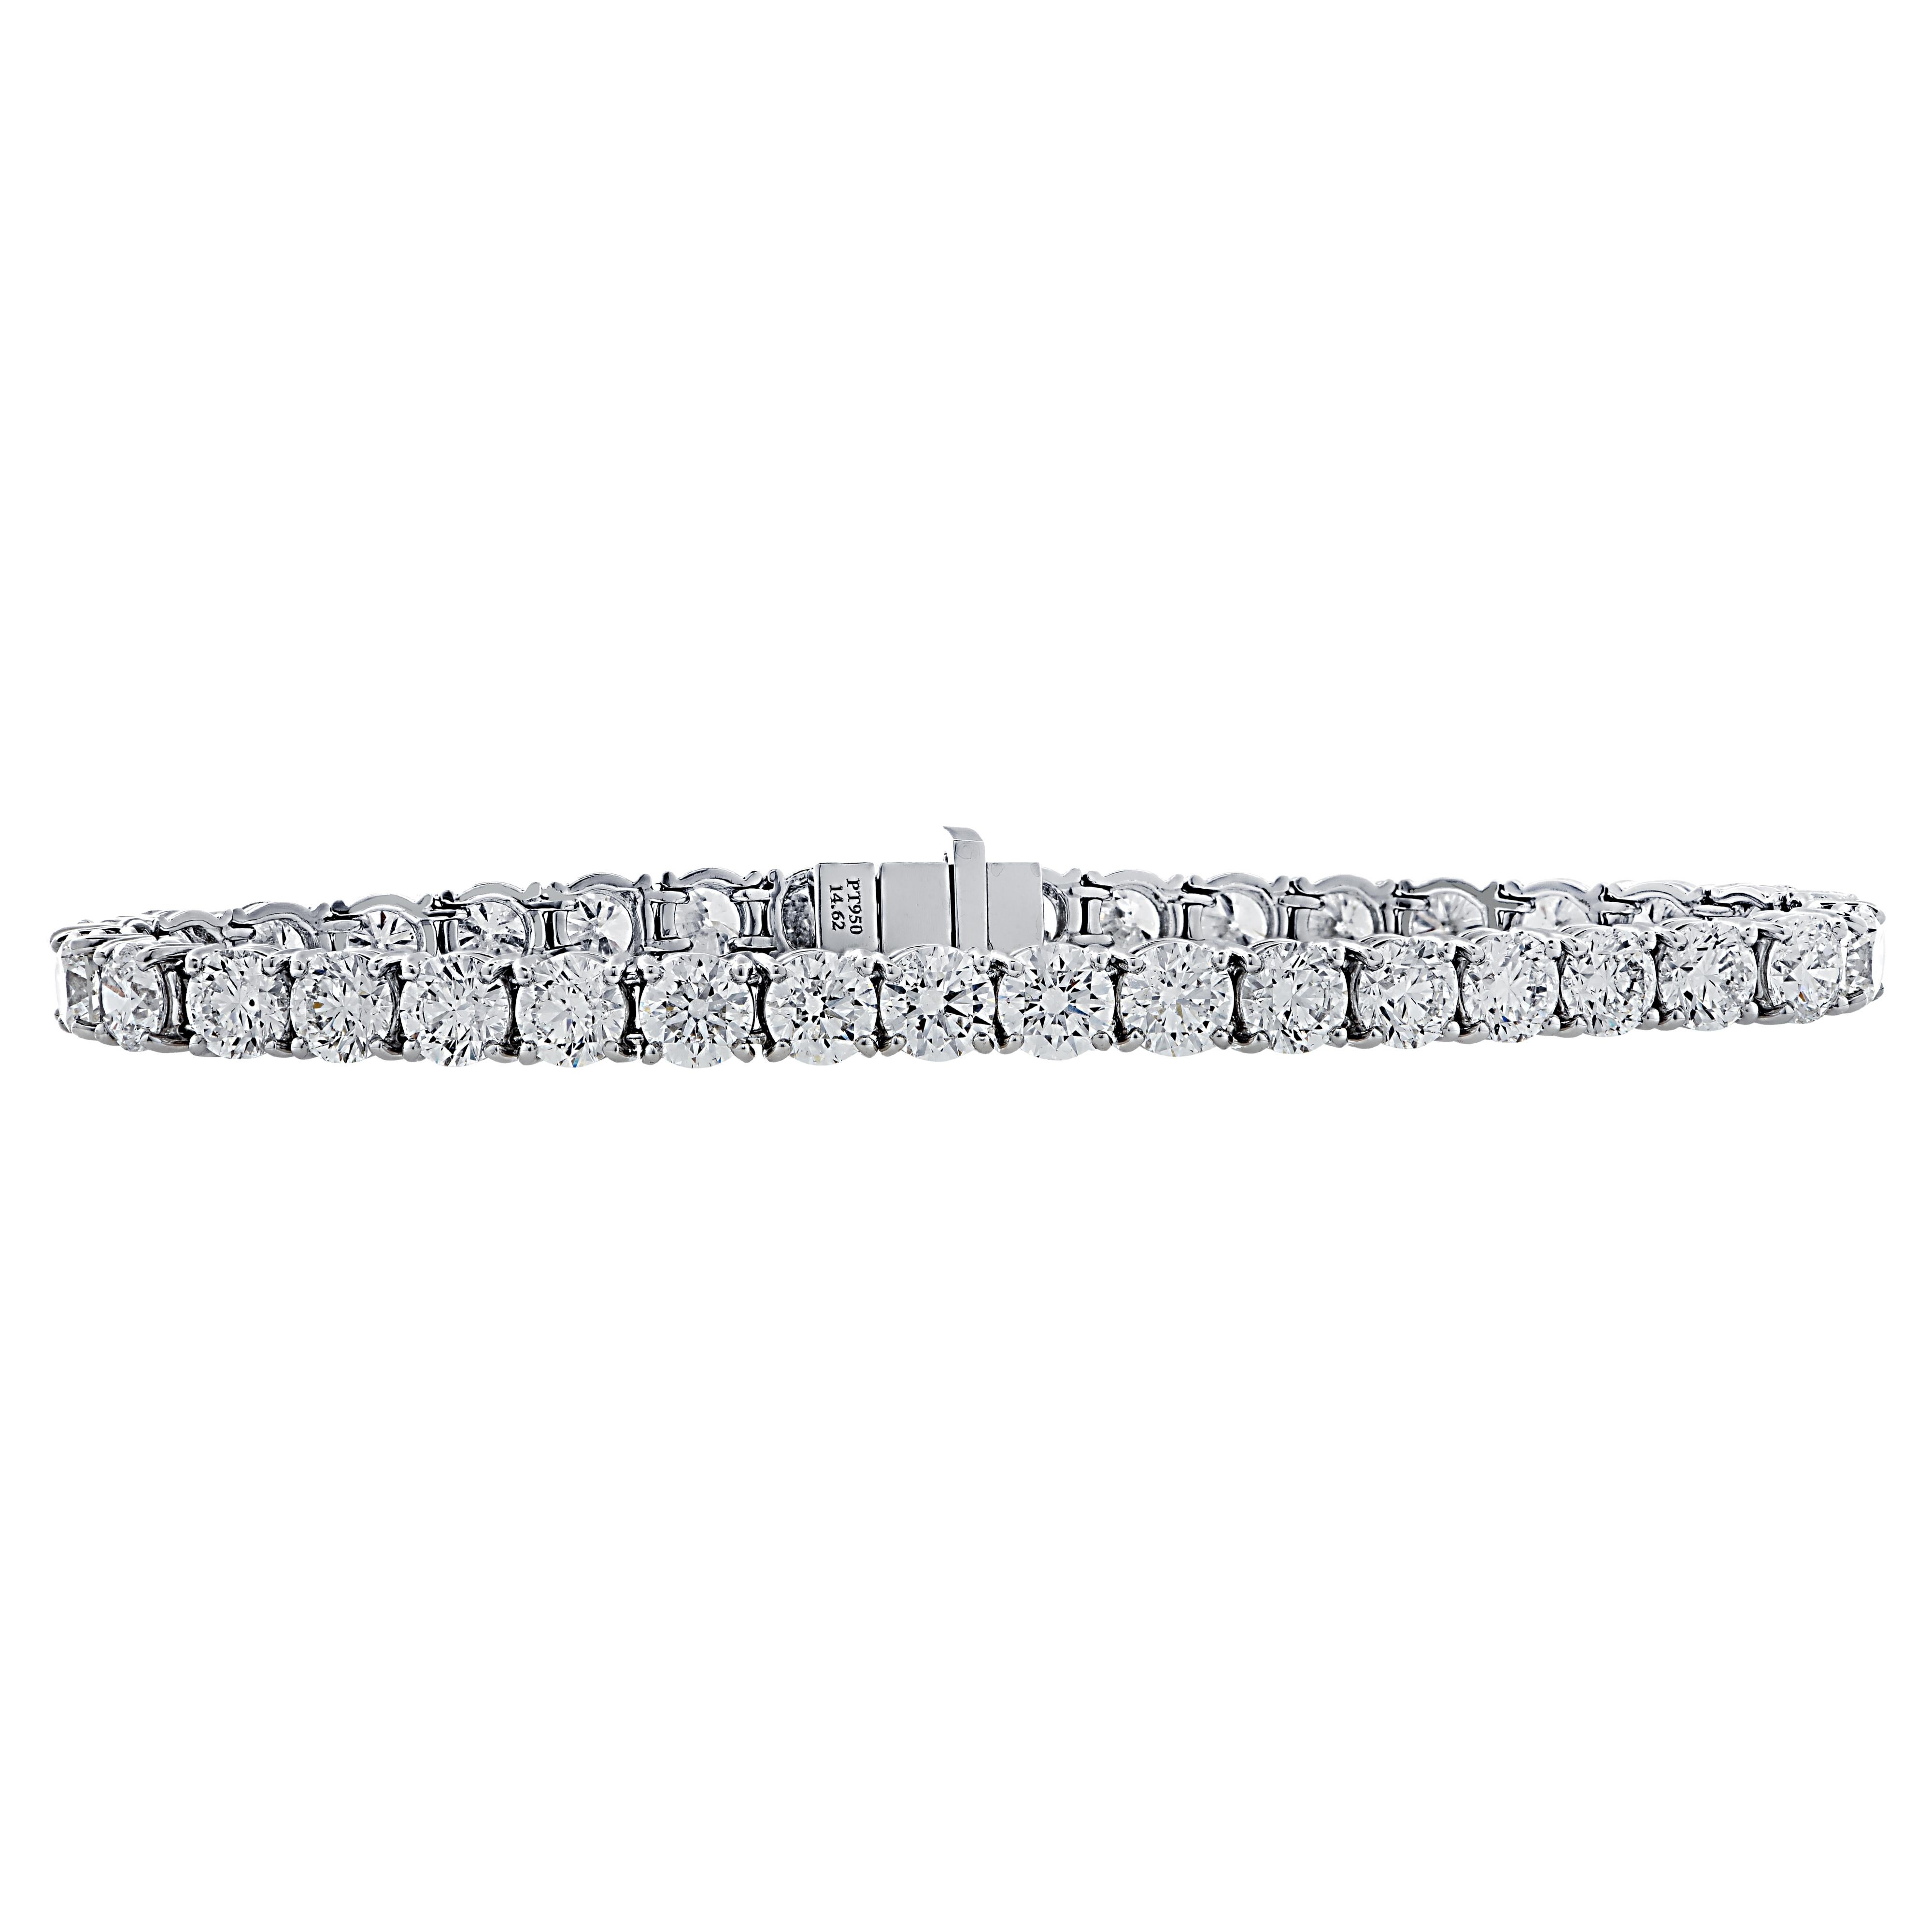 Exquisite Vivid Diamonds diamond tennis bracelet crafted by hand in platinum, showcasing 36 stunning round brilliant cut diamonds weighing 14.62 carats total, D-F color, VS-SI clarity. Each diamond is carefully selected, perfectly matched and set in